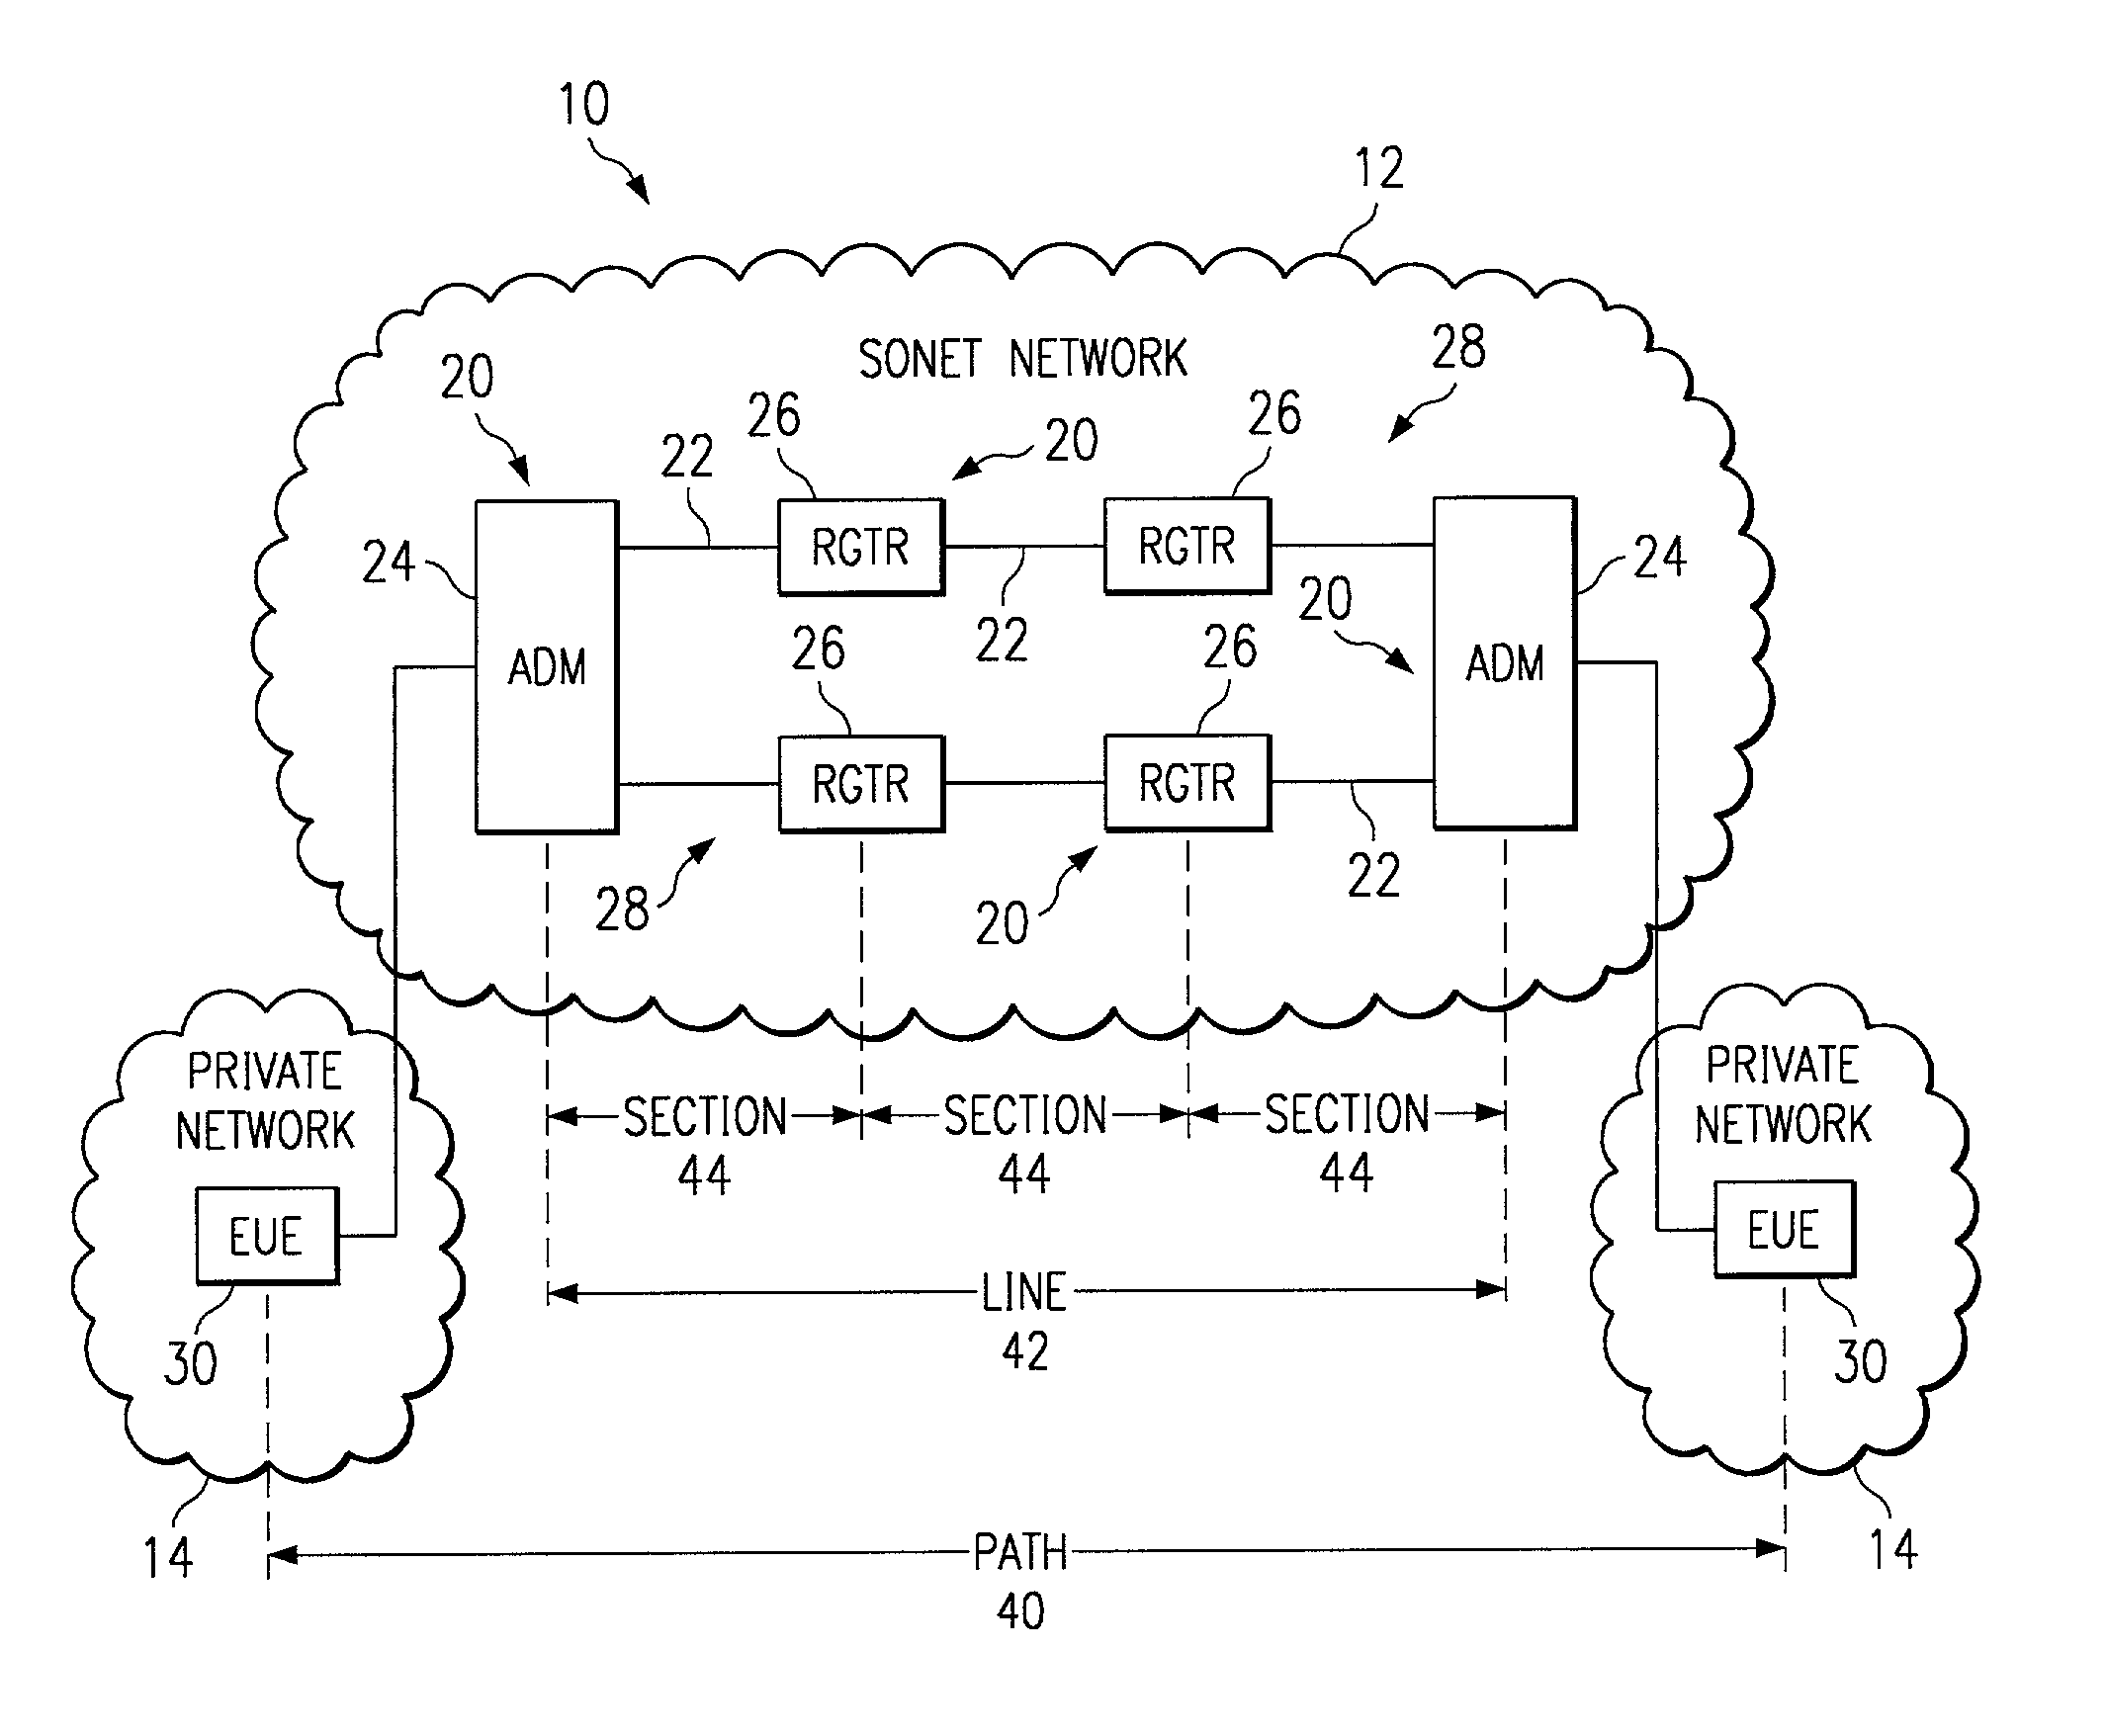 Method and system for automatic concatenation detection of synchronous optical network (SONET) channels